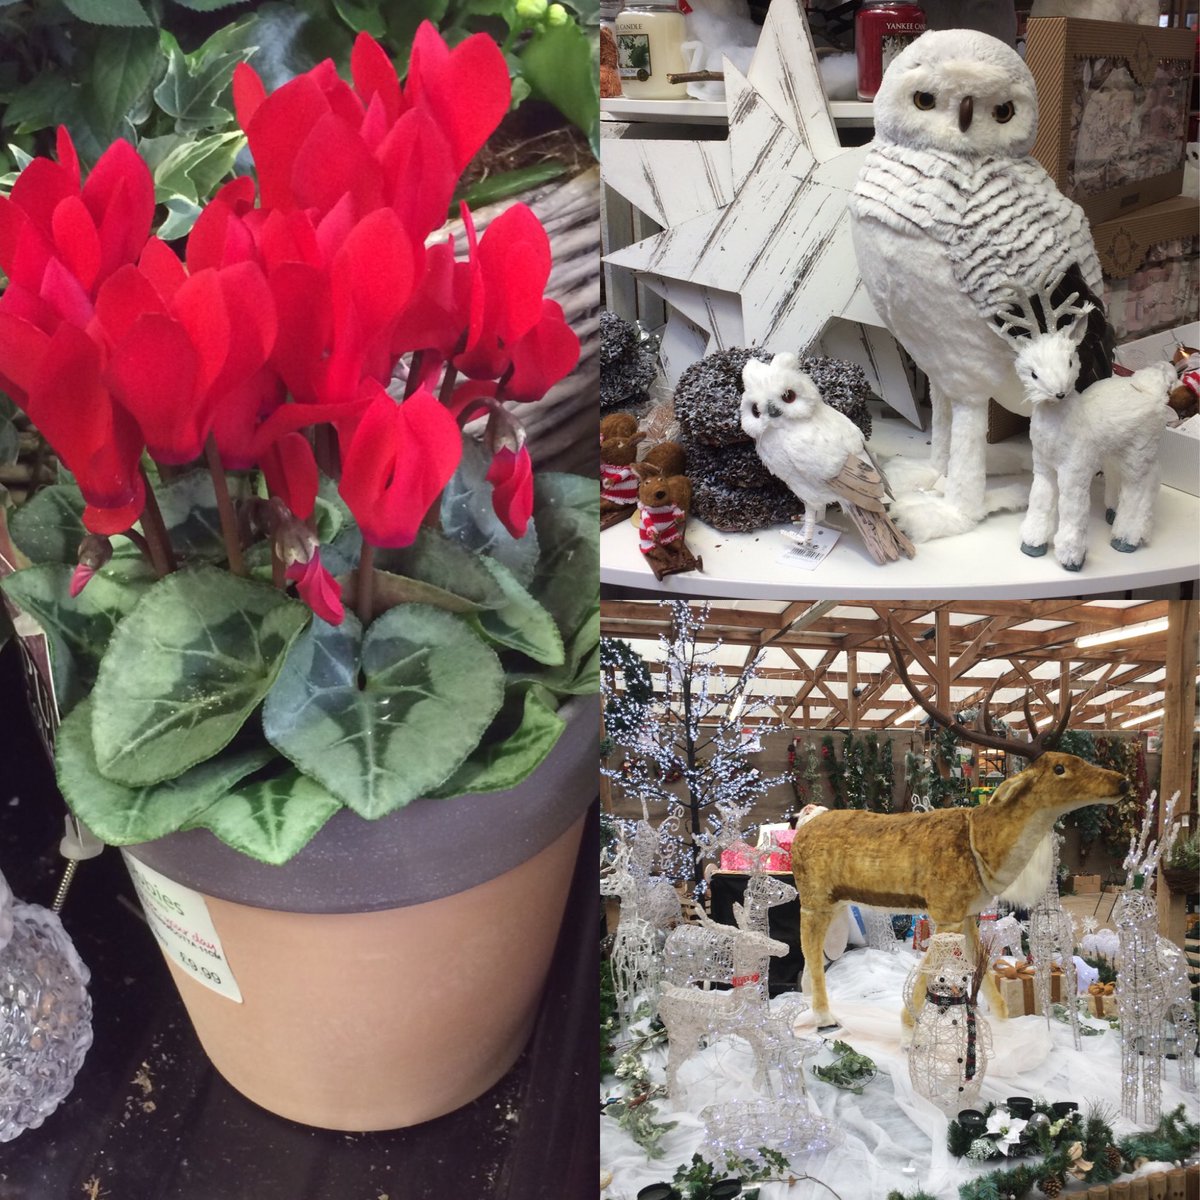 It's beginning to look a lot like Christmas....
Each year the Christmas displays just get better!
#HUK #christmas #gardencentres #gardencentreretail #Retail #retailers #display #Christmas2019 #ChristmasIsComing